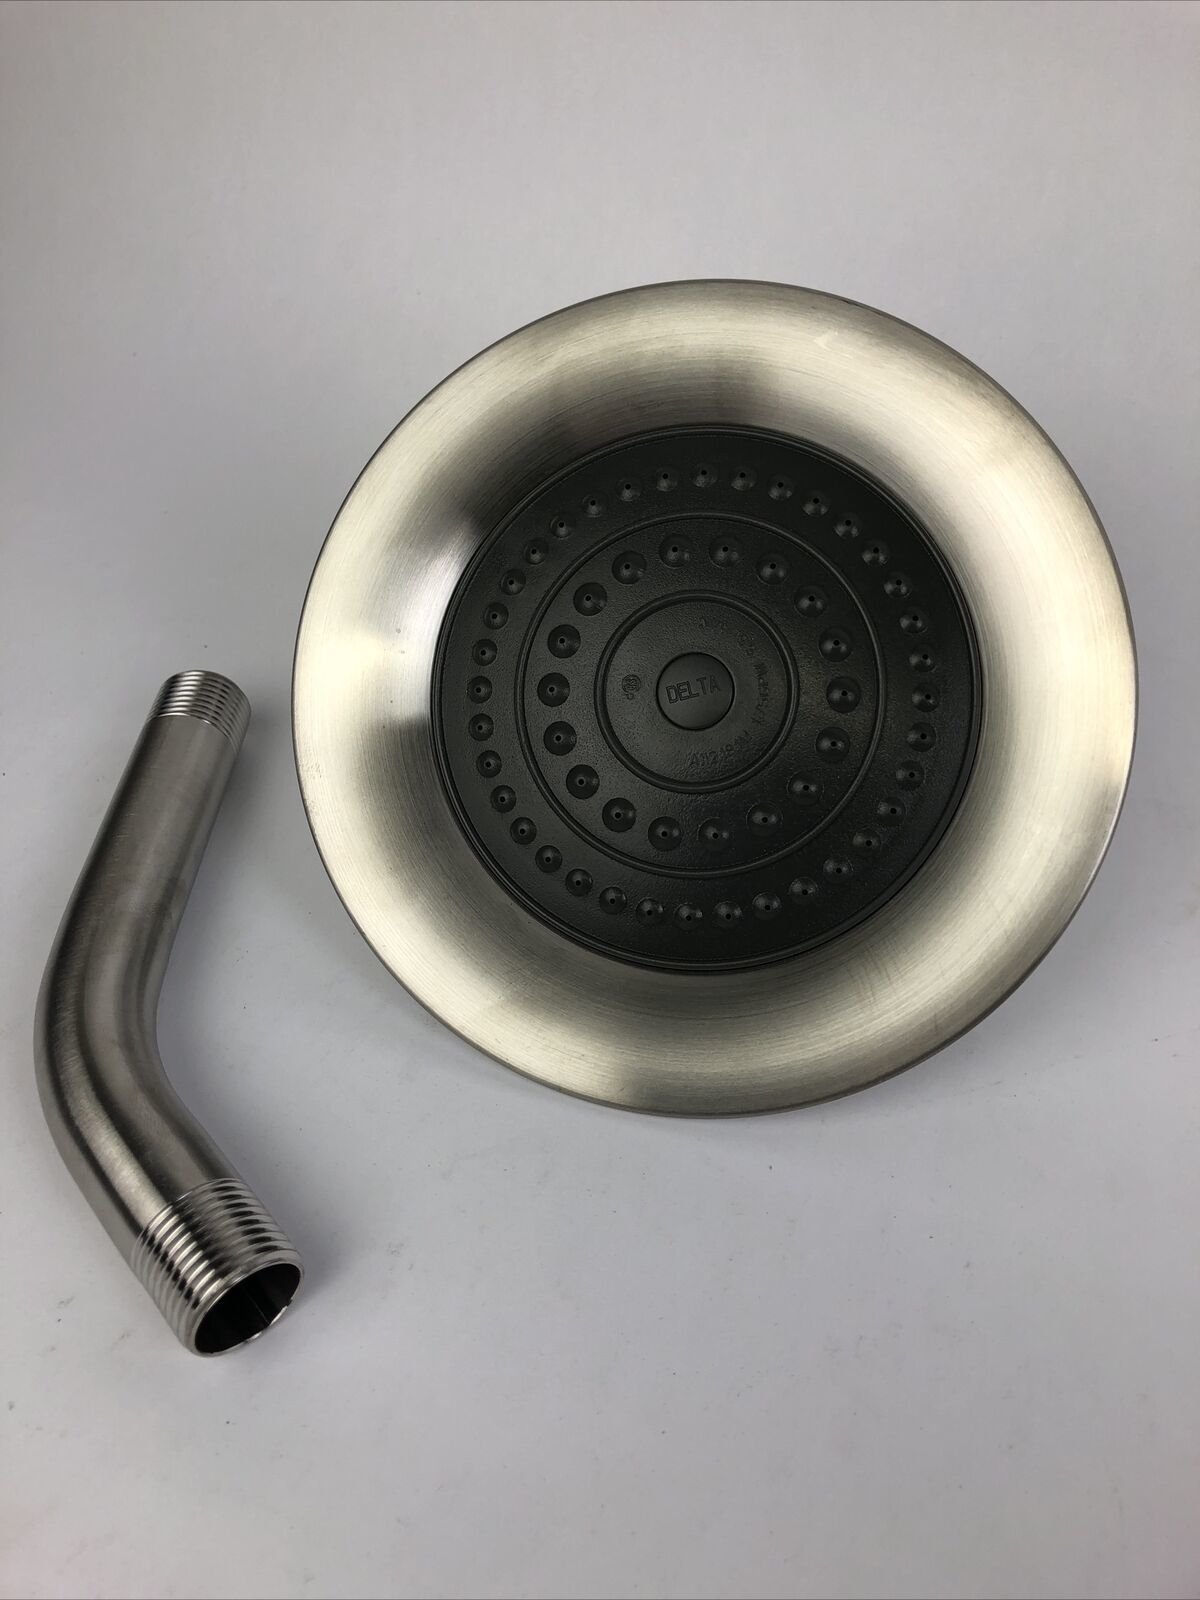 Primary image for Delta A112.18JM 1.75 GPM Single Function Rain Shower Head with Extension - LOOK